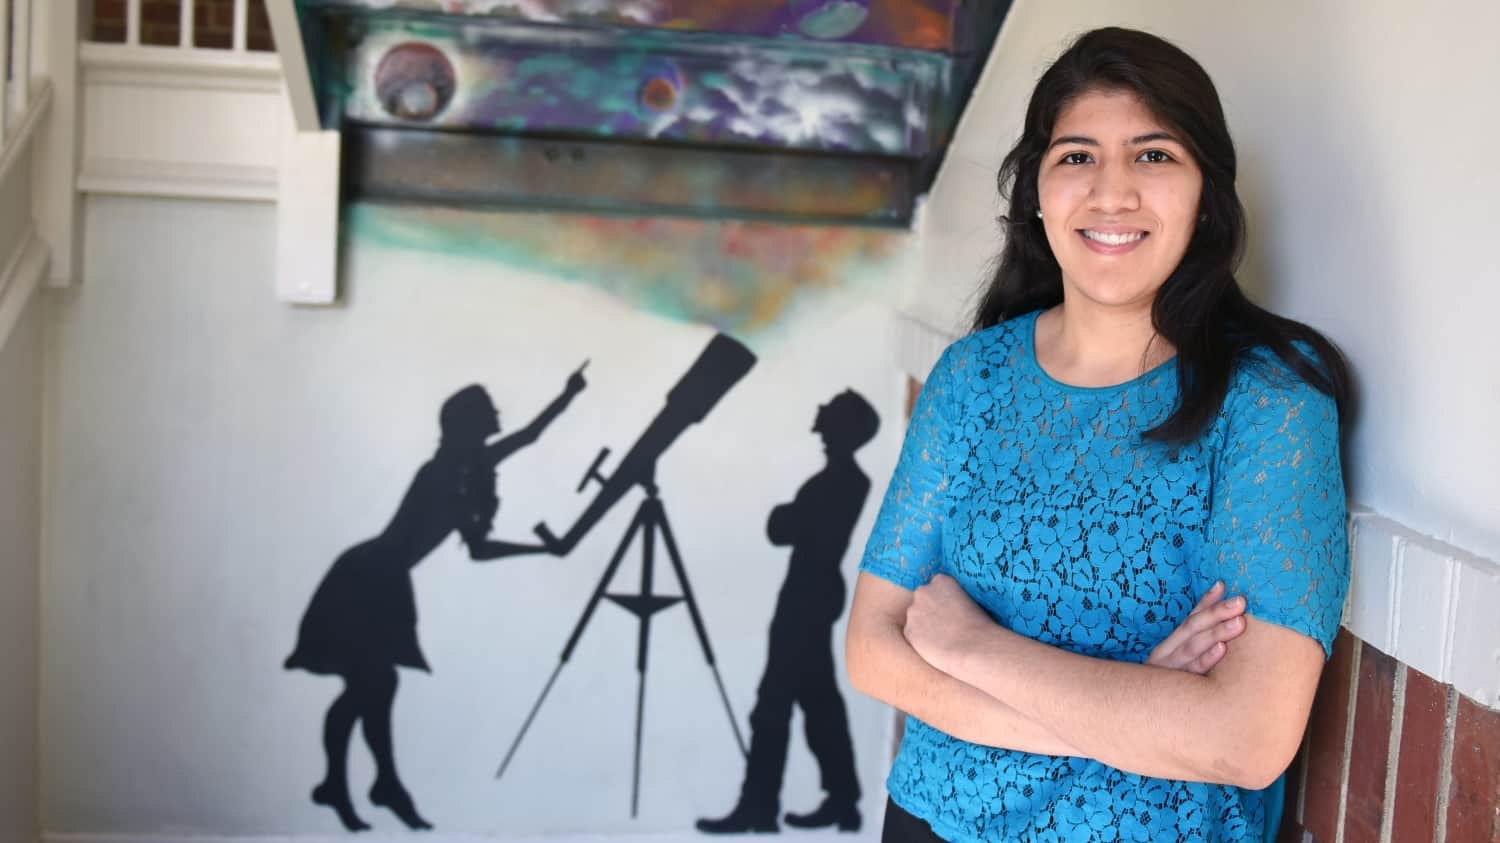 Paola Rivera in front of a painted silhouette of a man and woman at a telescope